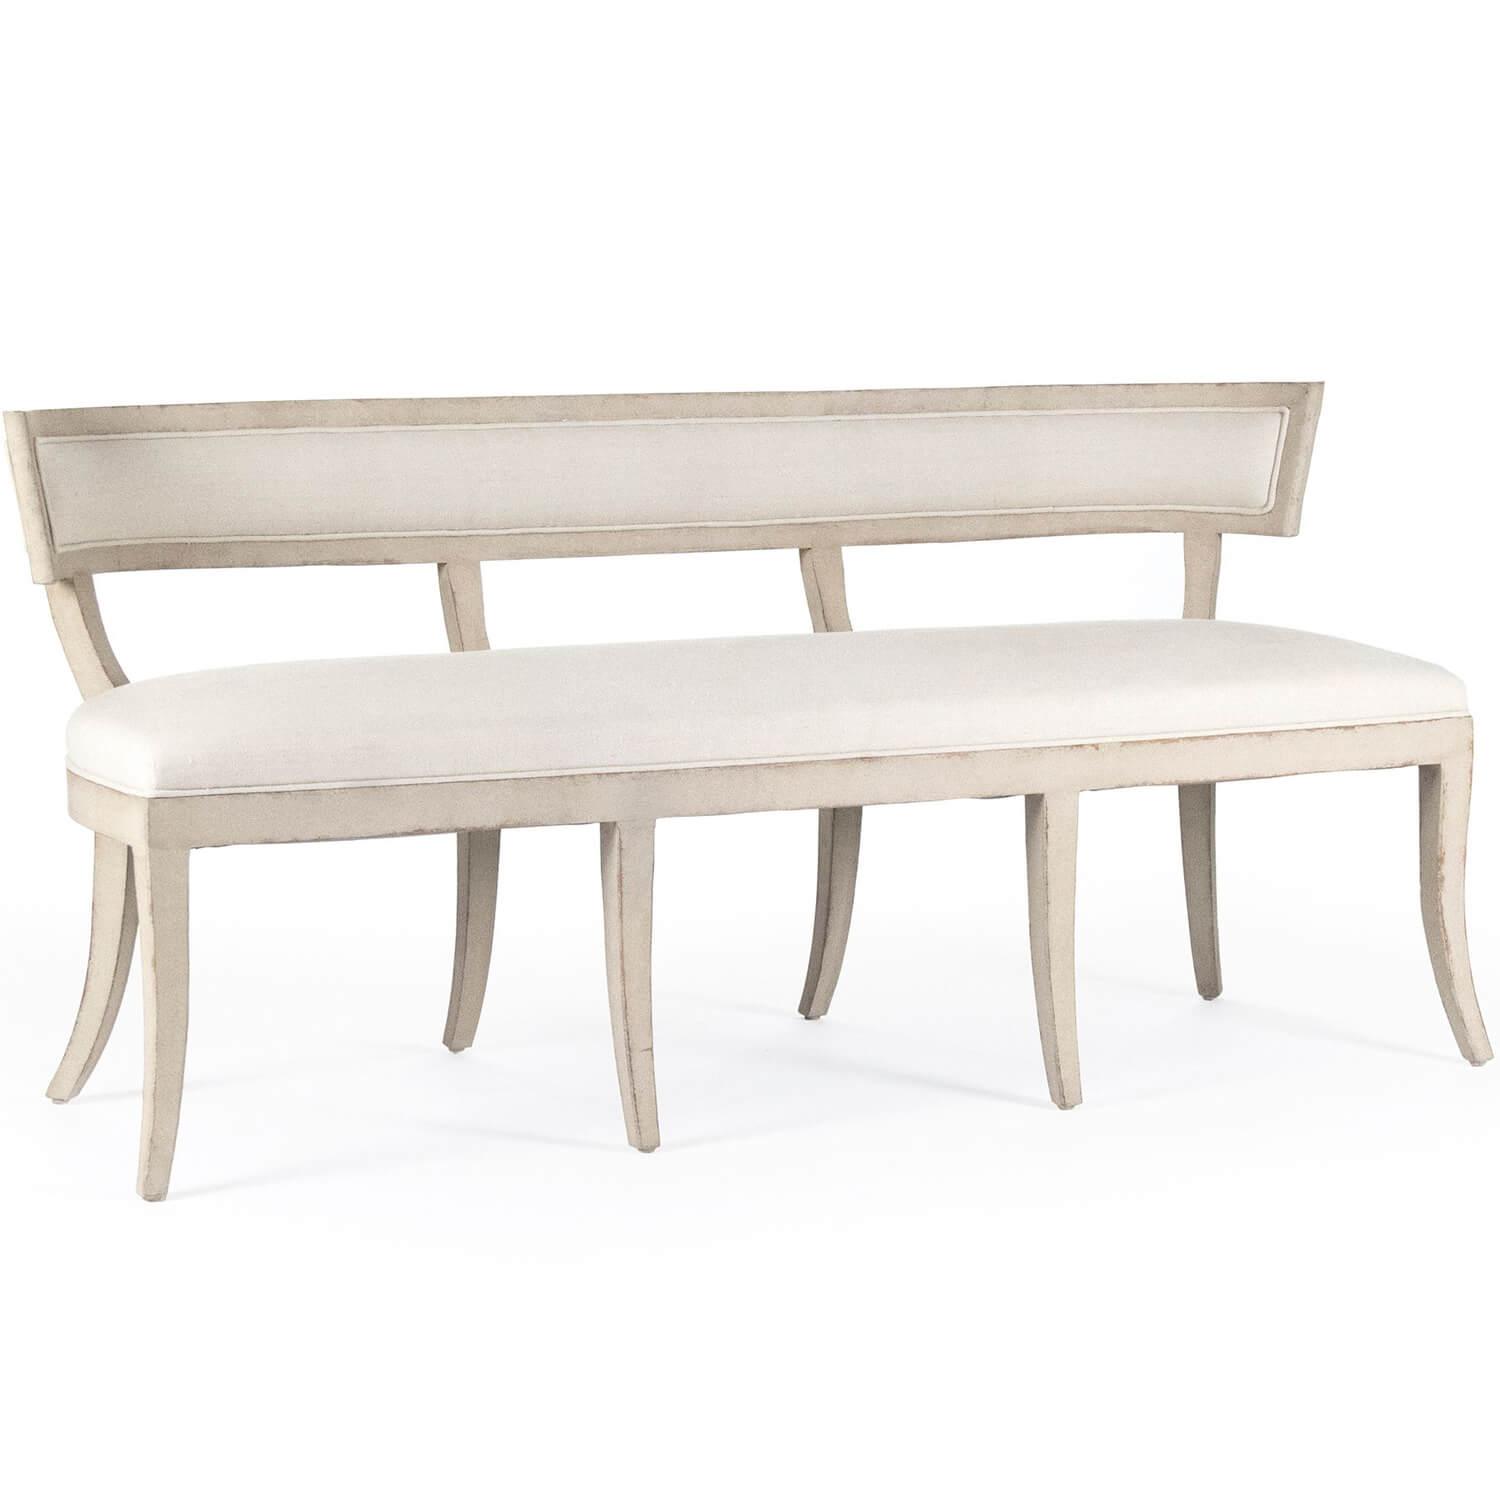 French Shabby Chic Bench - Belle Escape